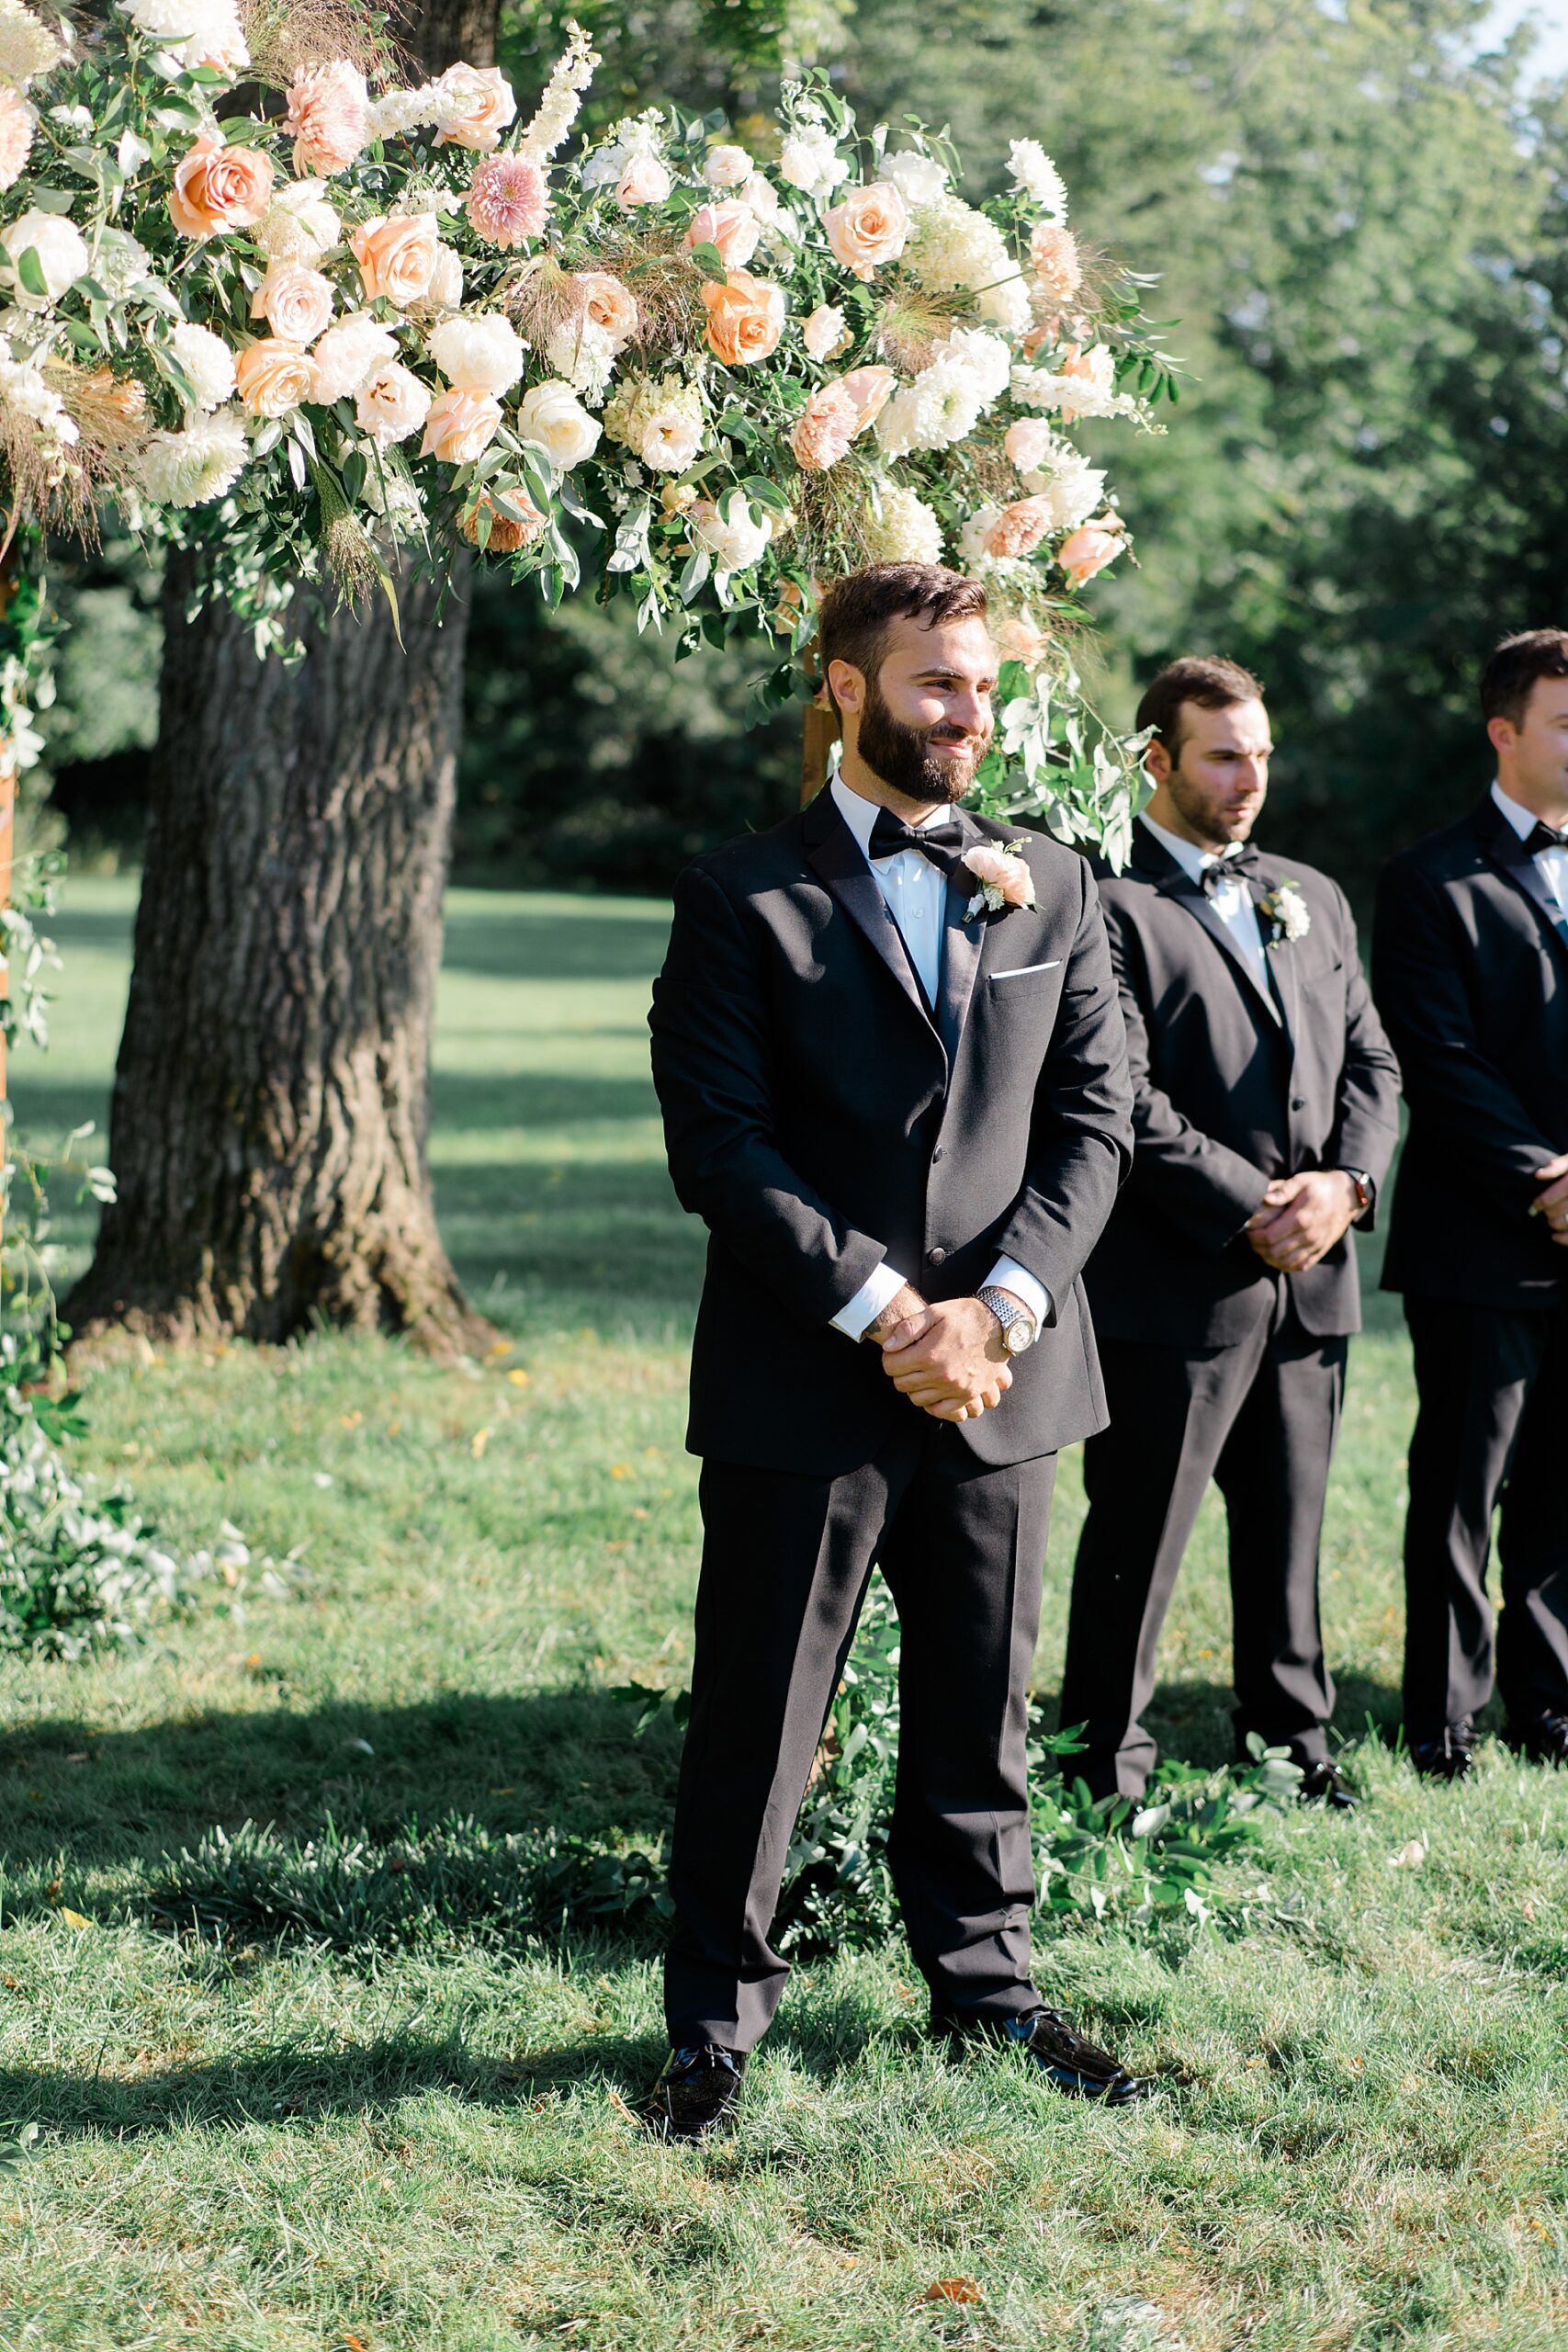 groom waits for his bride during outdoor ceremony from Romantic Floral-Centered Wedding at The Inn at Barley Sheaf Farm